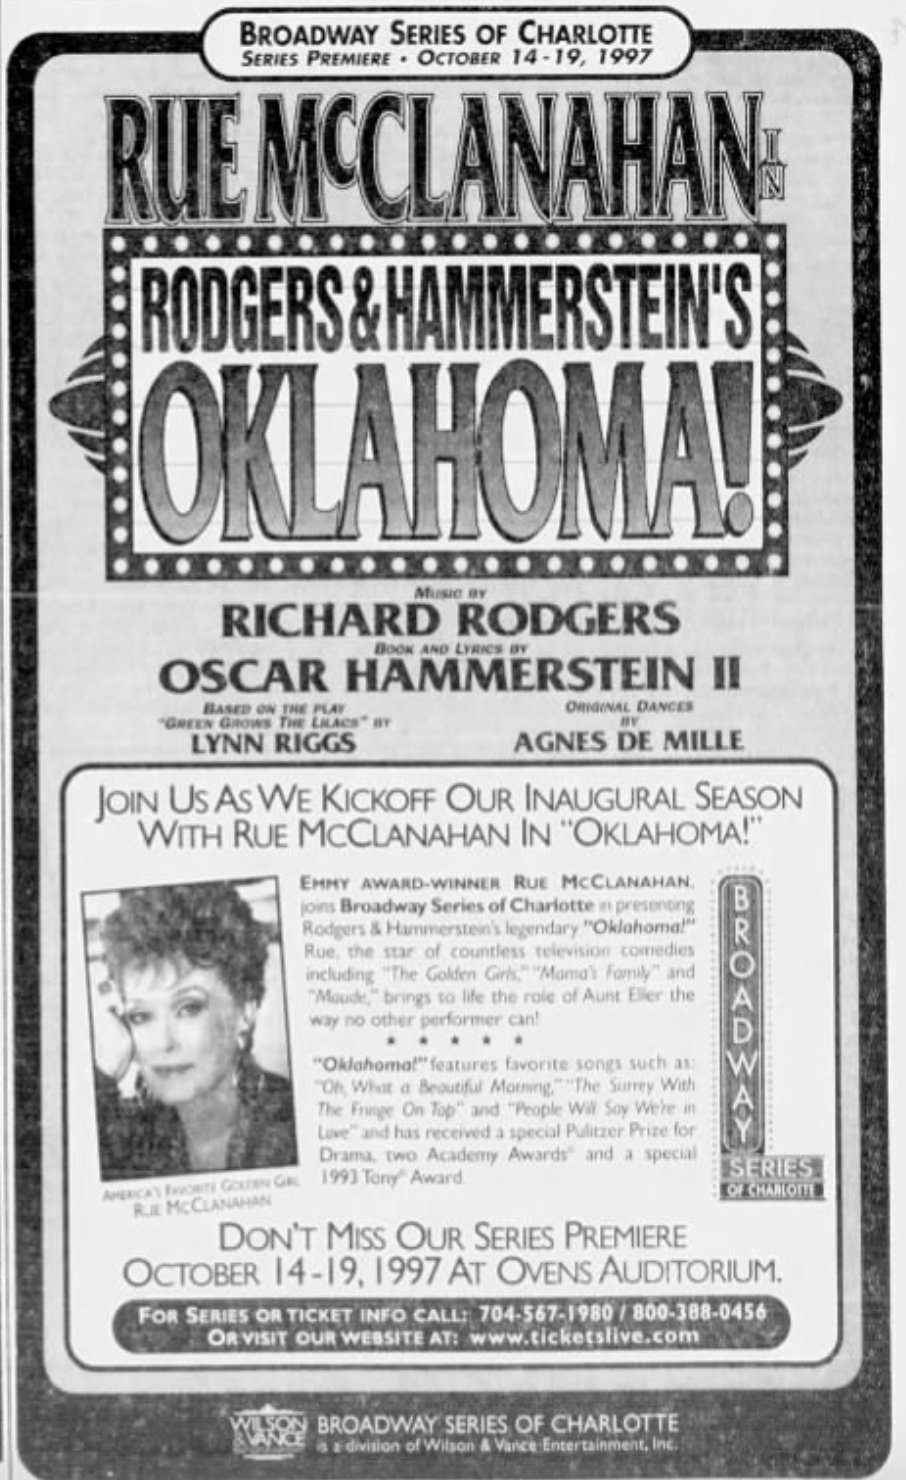 Happy birthday Rue McClanahan! Would\ve loved to see her as Aunt Eller in Oklahoma! 